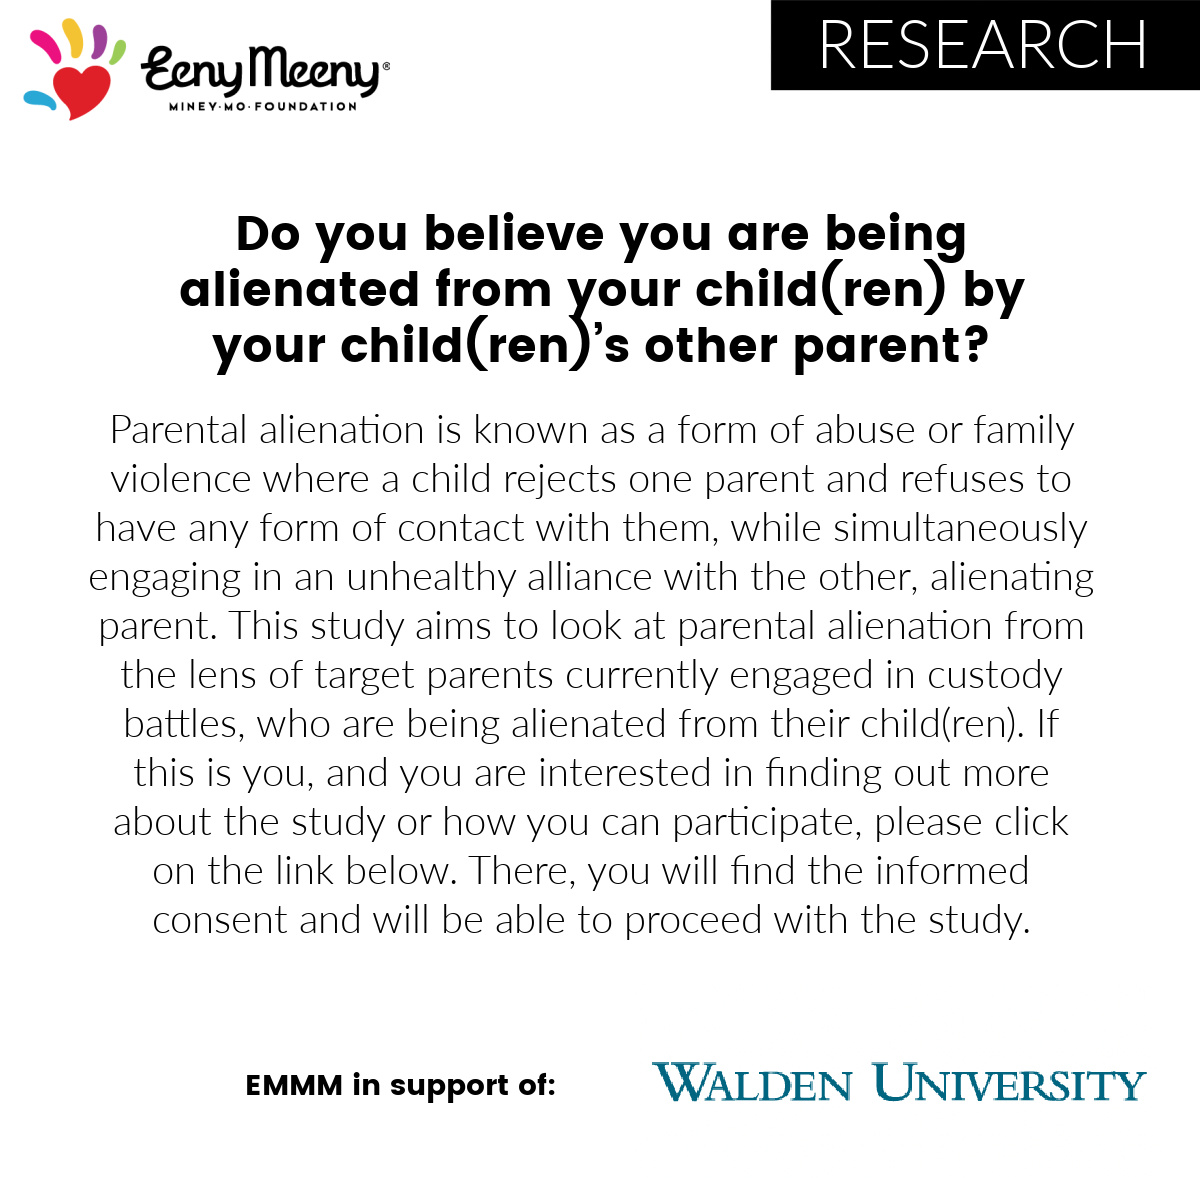 You are currently viewing Recruiting research participants for a study about parental alienation